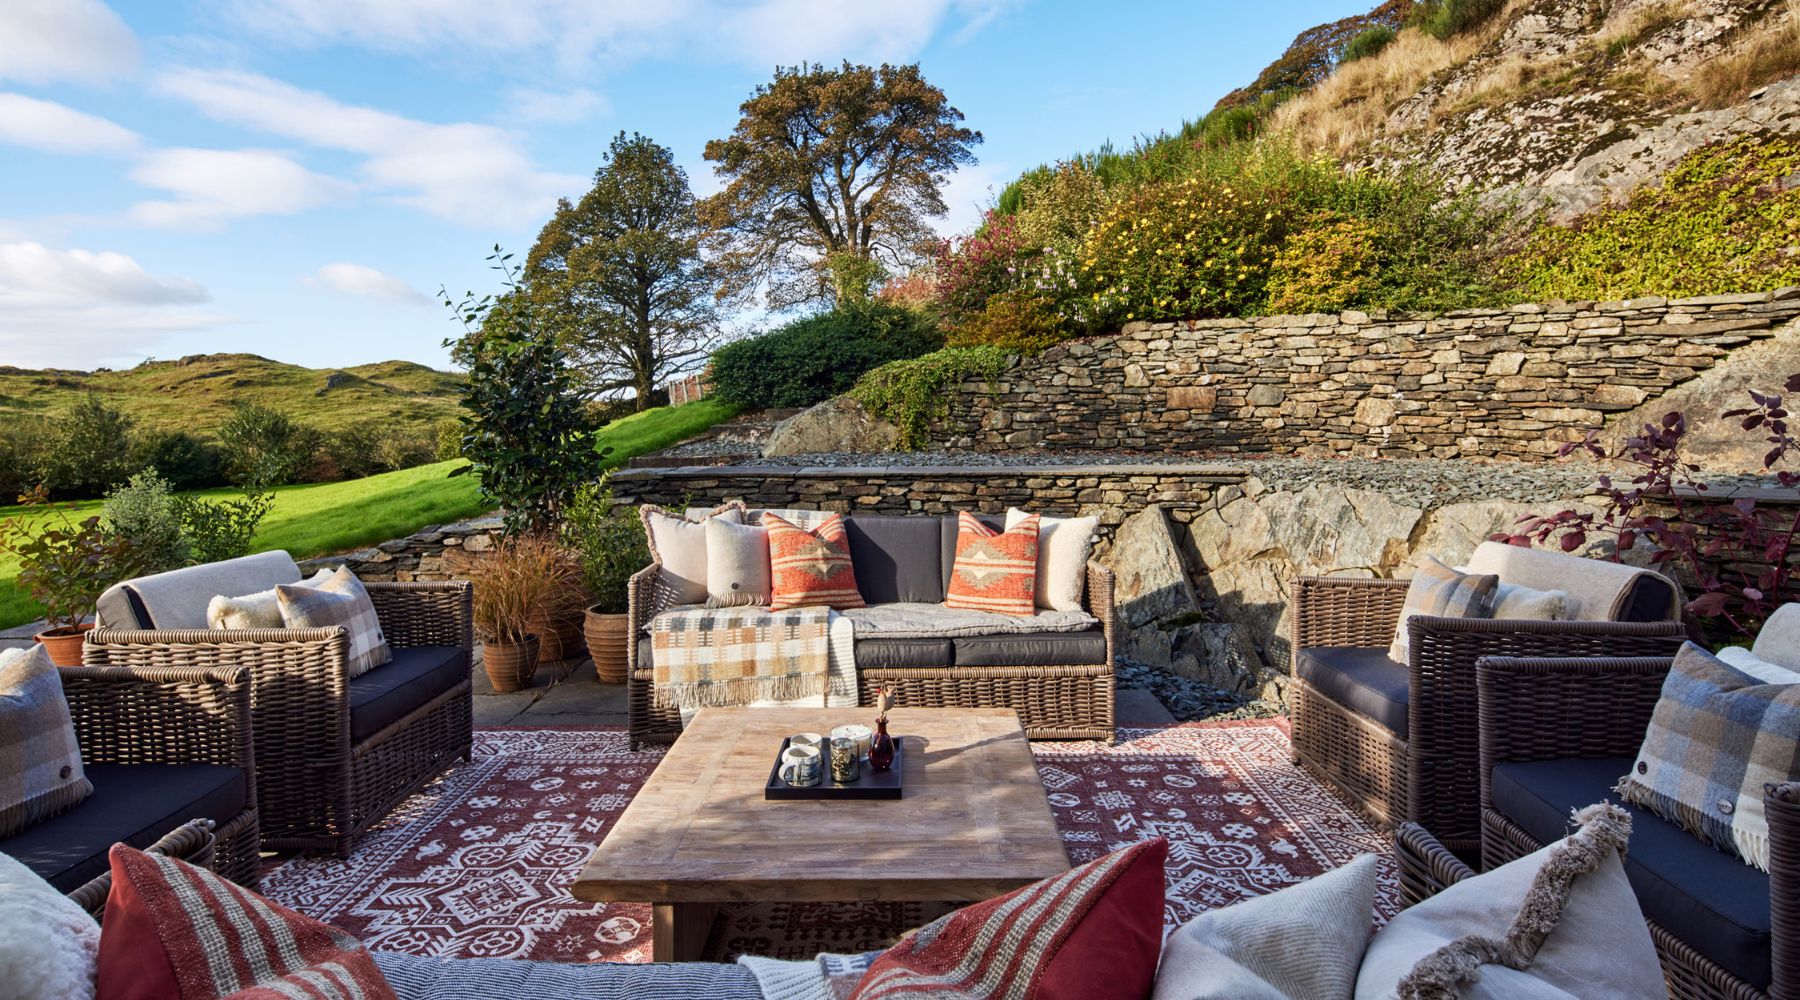 Omaze Million Pound House Lake District  Outdoor lounge with wicker sofas surrounded by drystone walls and mature trees in the sun